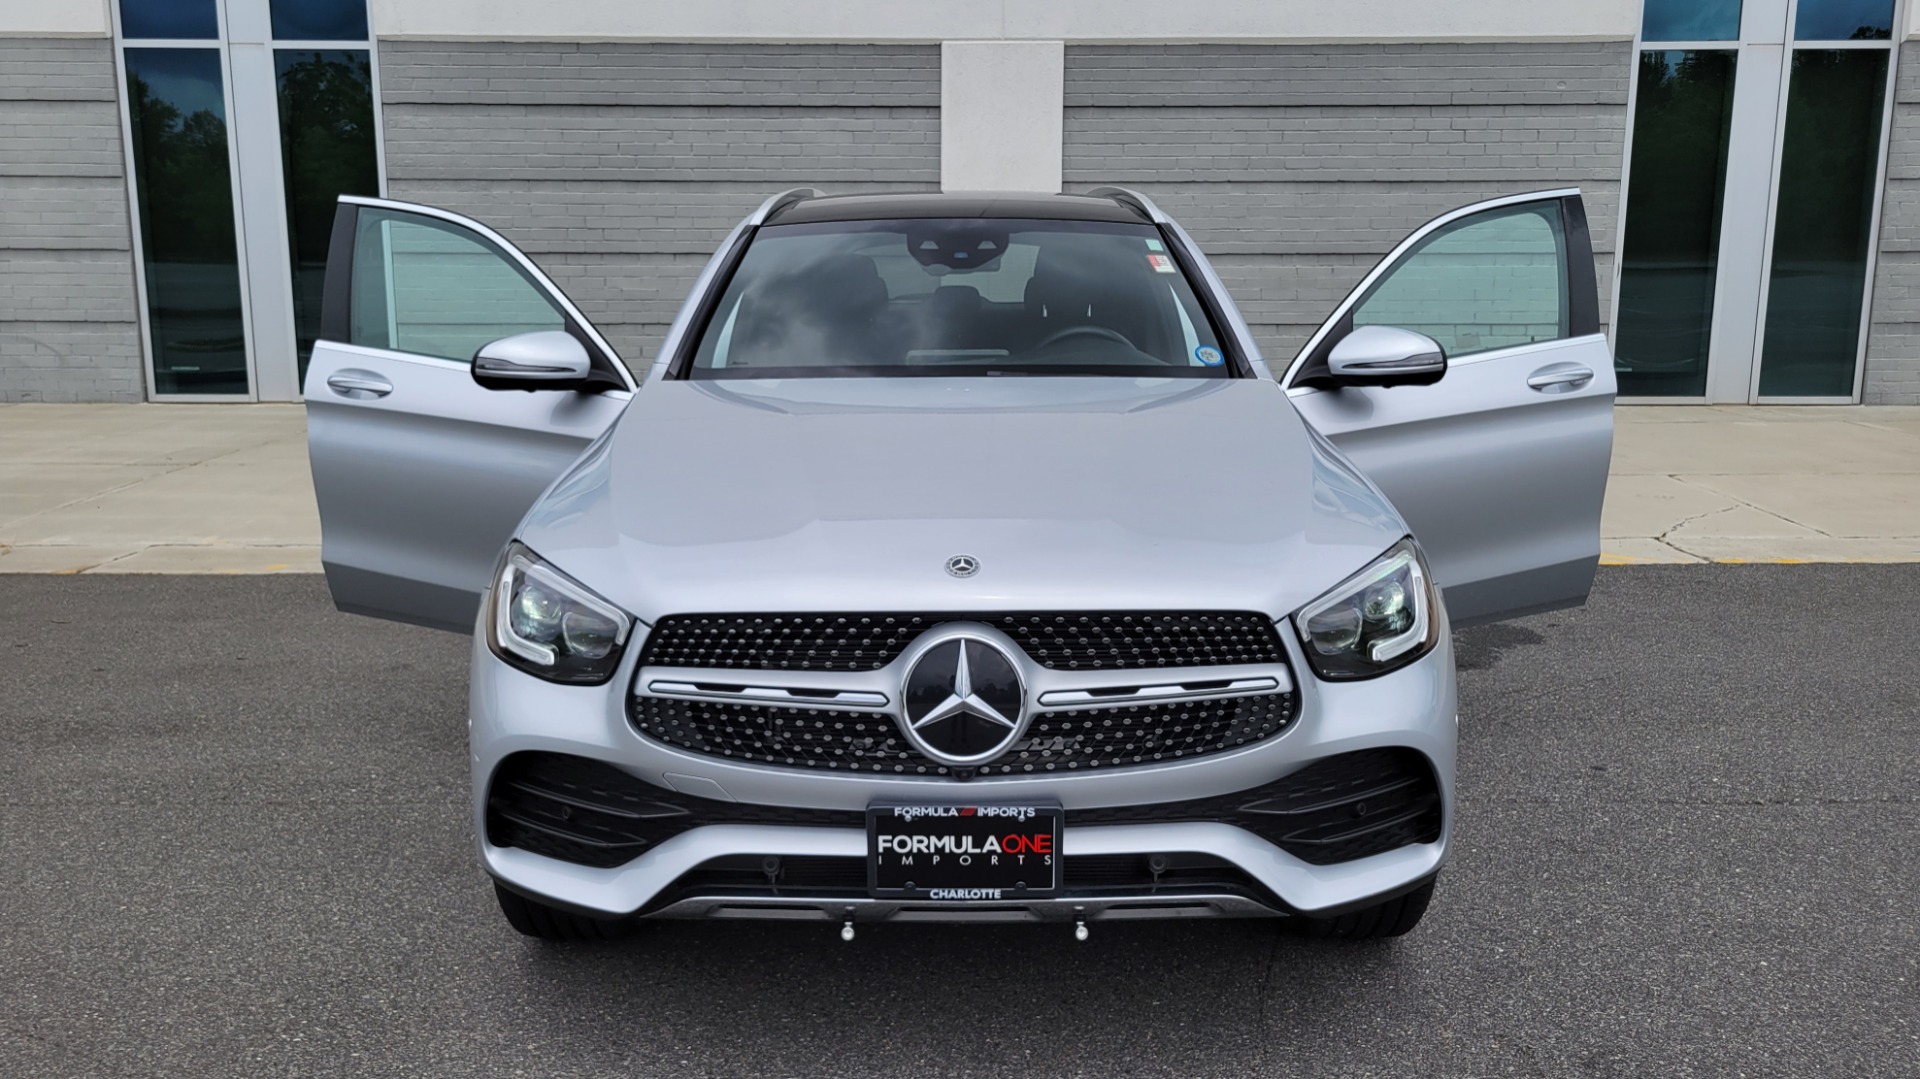 Used 2020 Mercedes-Benz GLC 300 PREMIUM / MULTIMEDIA / PARK ASST / LIGHTING / PANO-ROOF / CAMERA for sale $48,999 at Formula Imports in Charlotte NC 28227 26